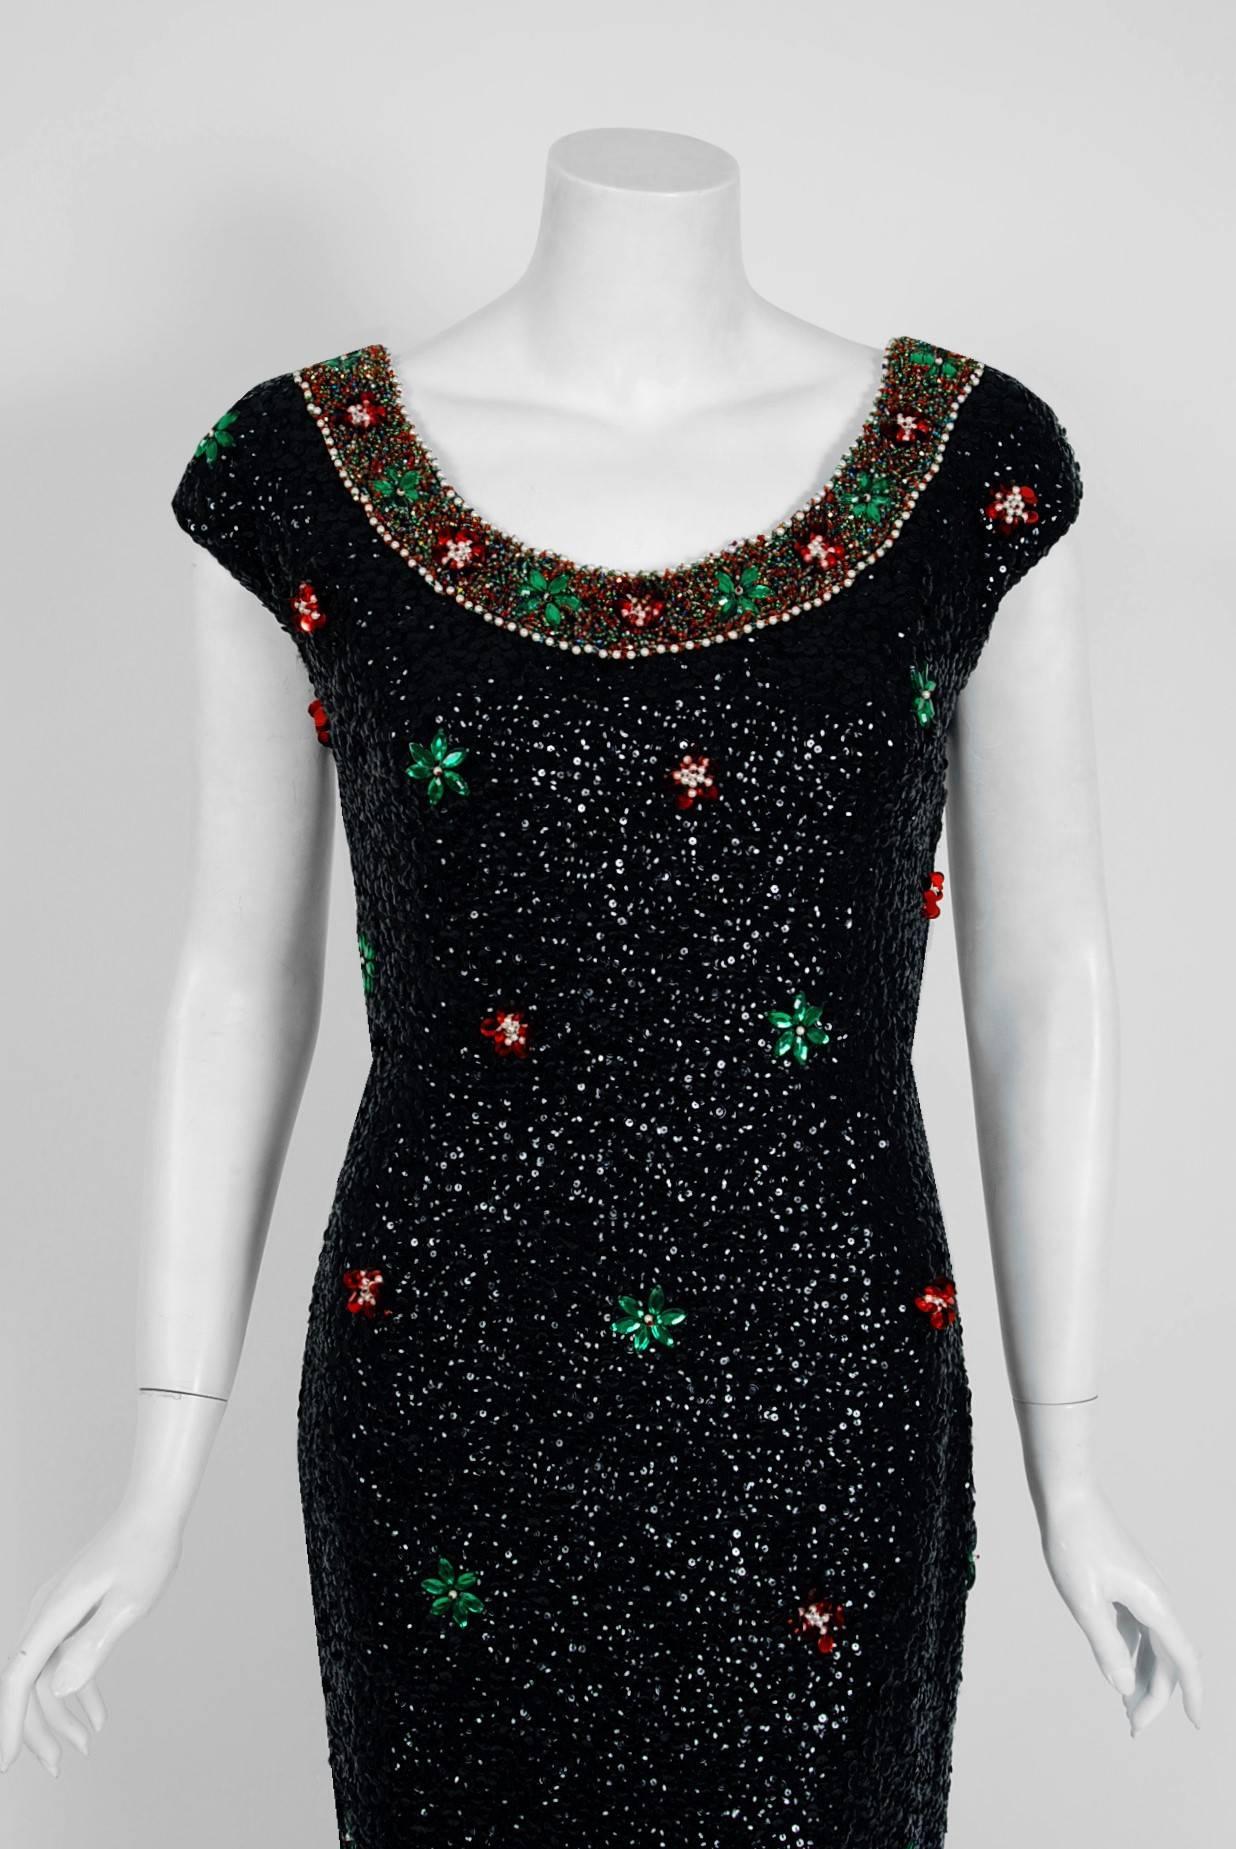 1950's Imperial designer glamour garments are in a class of their own! They are always fully-sequined by hand and fit to flatter the figure. This treasure has a fantastic red & green abstract-floral design worked in, featuring three-dimensional